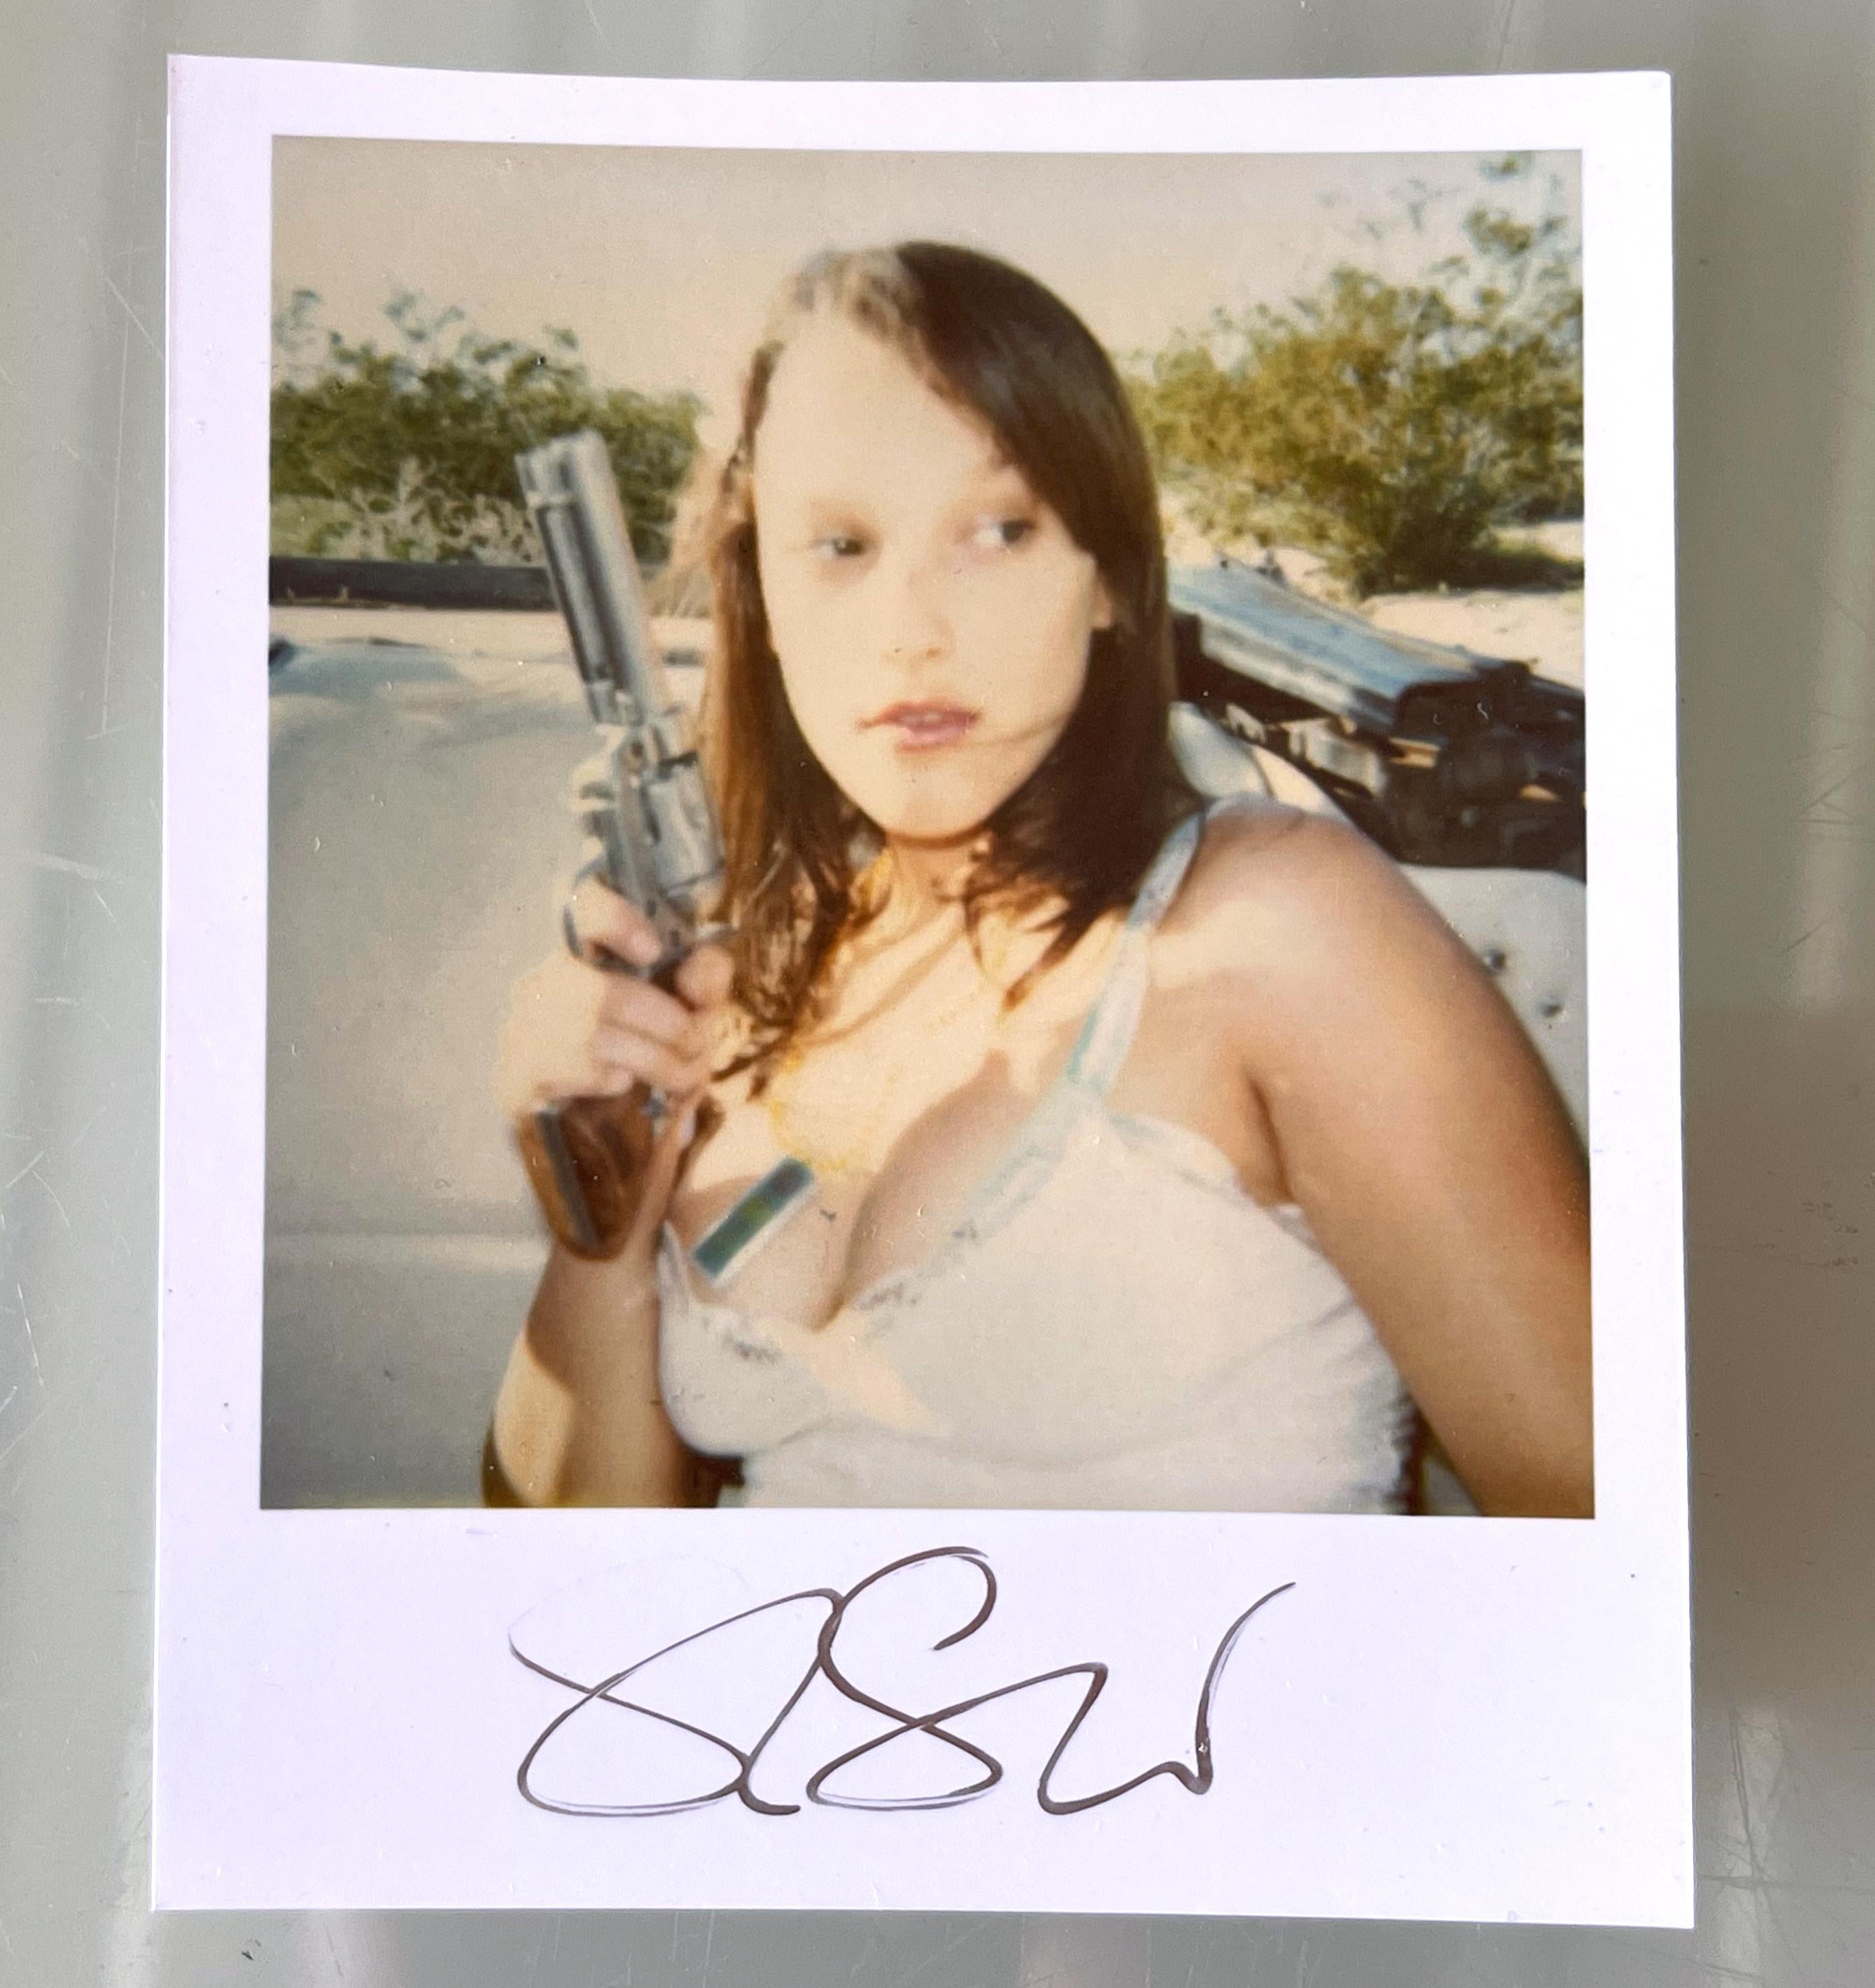 Stefanie Schneider's Mini
Six Shooter (Till Death Do Us Part) - 2005
featuring Austin Tate

signed in front, not mounted. 
Digital Color Photographs based on a Polaroid. 

Polaroid sized open Editions 1999-2023
10.7 x 8.8cm (Image 7.9x7.7cm)